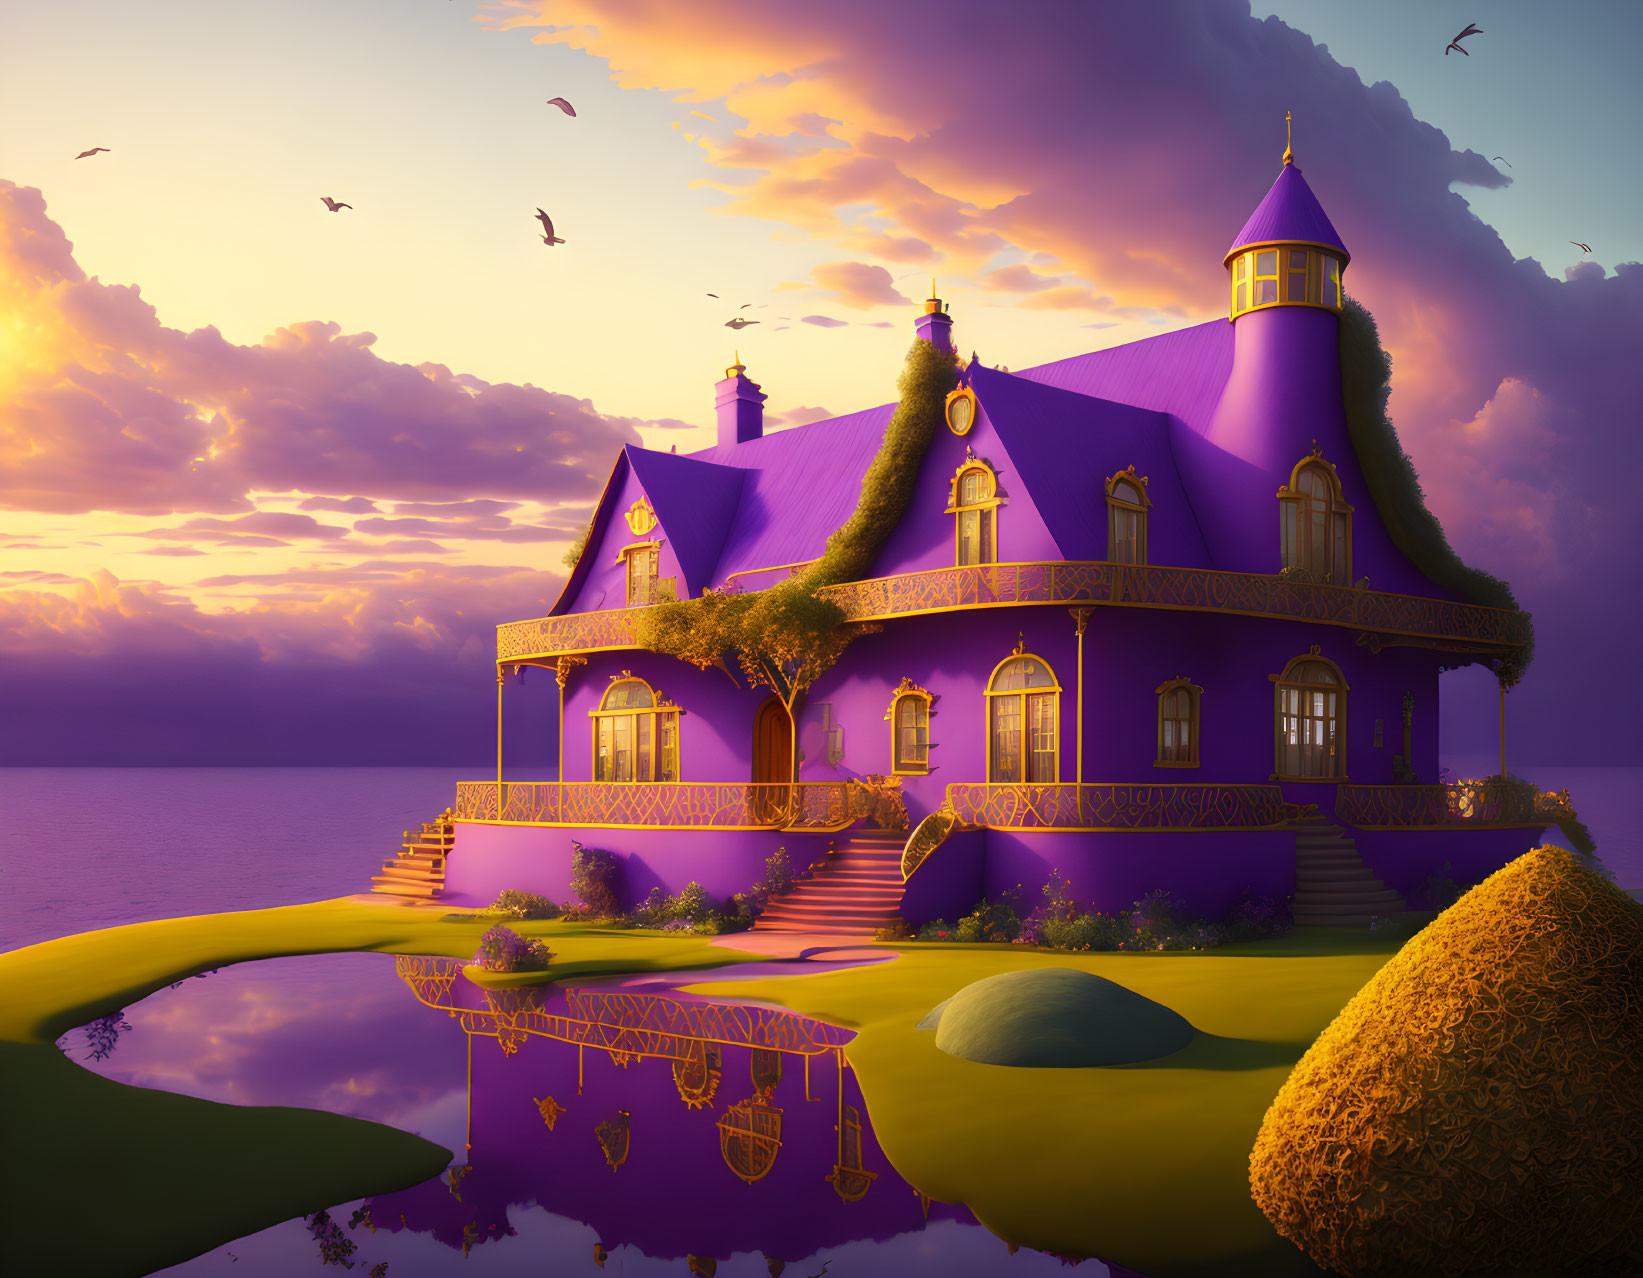 Purple turreted house by calm lake at sunset with bird-filled sky